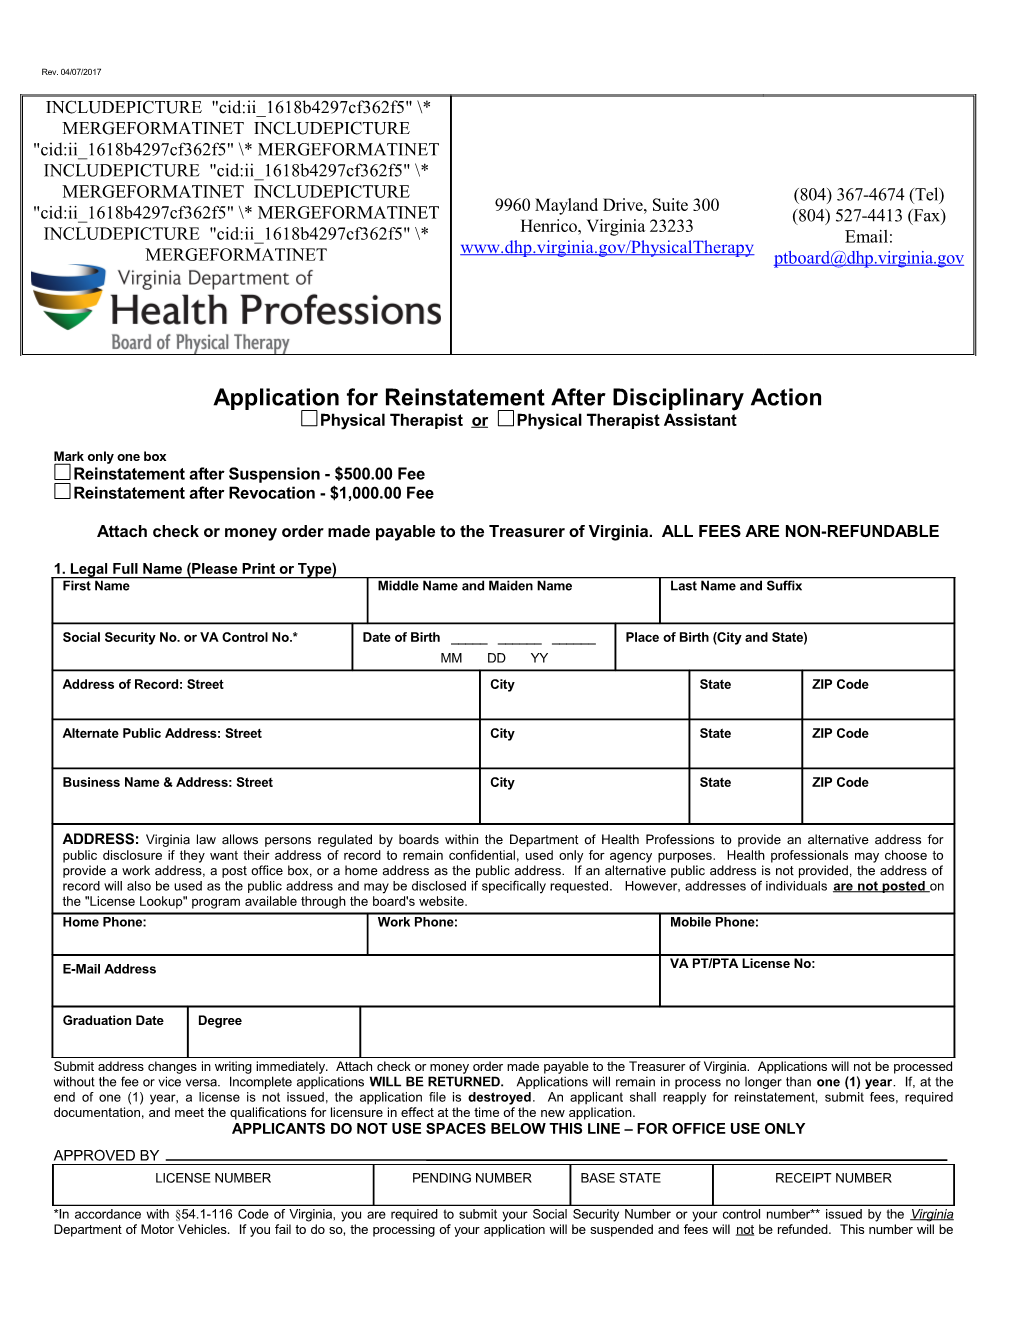 Application for License by Reinstatement to Practice Physical Therapy